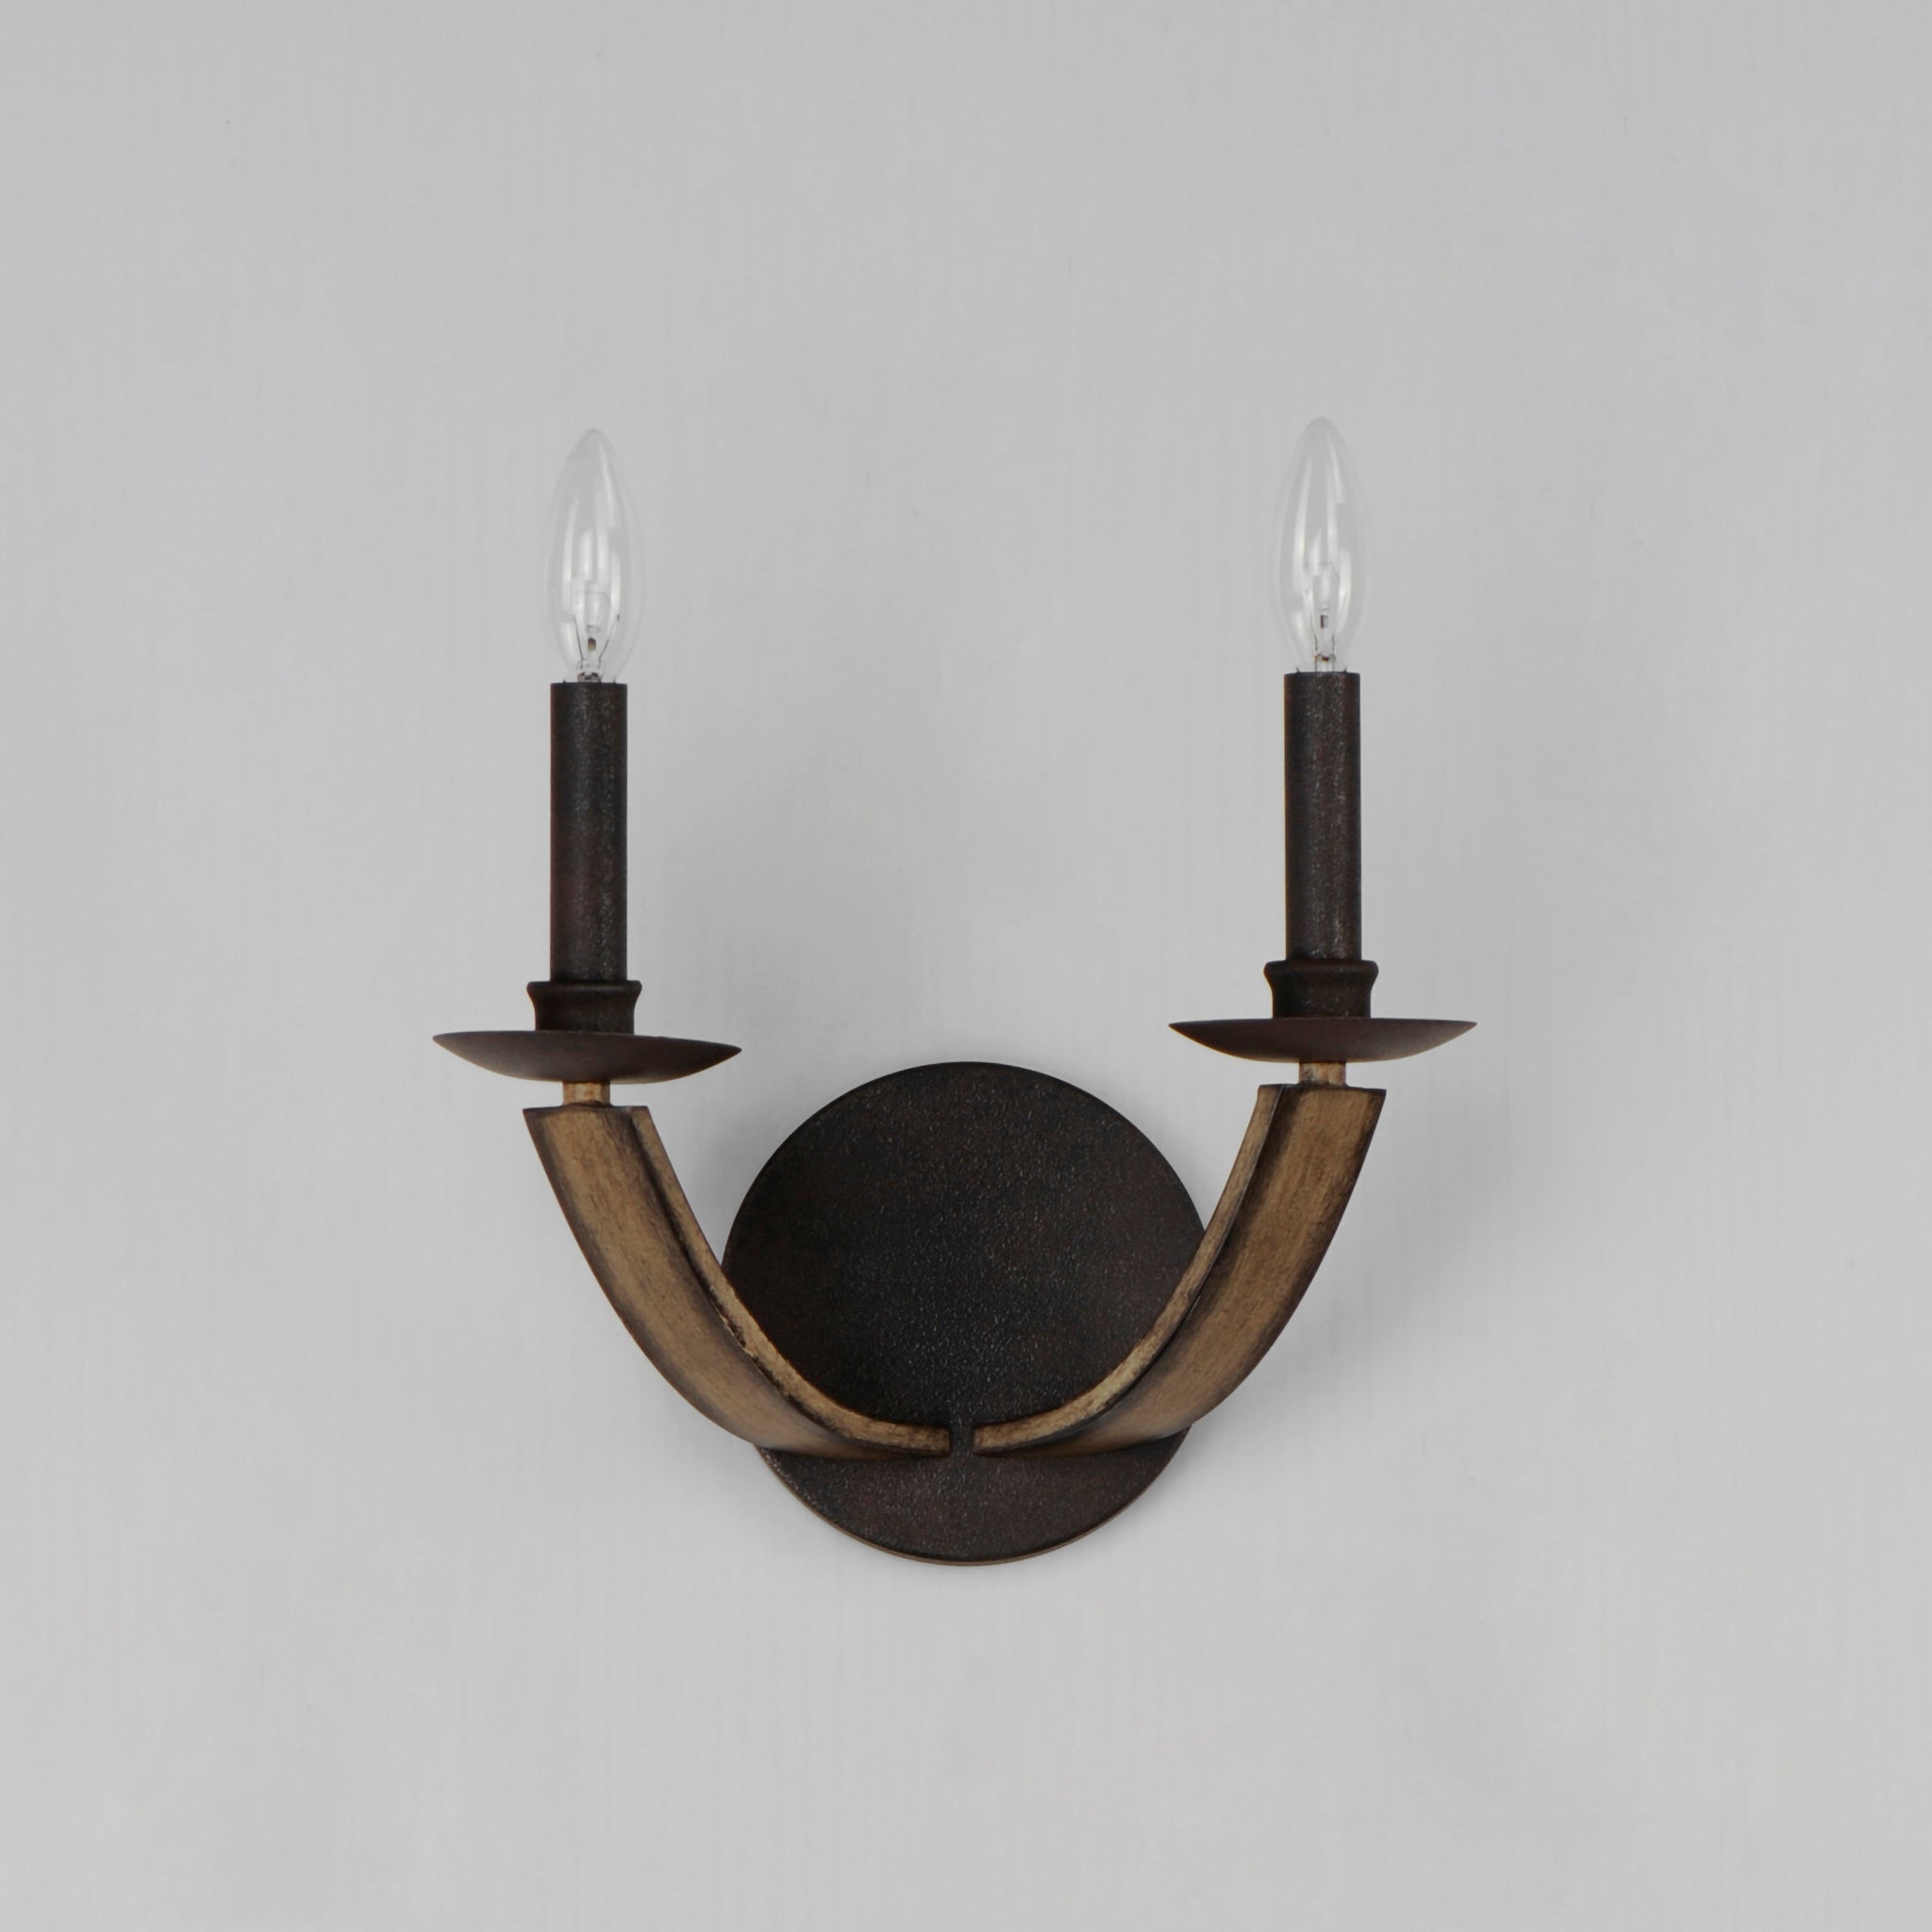 Basque 2-Light Wall Sconce